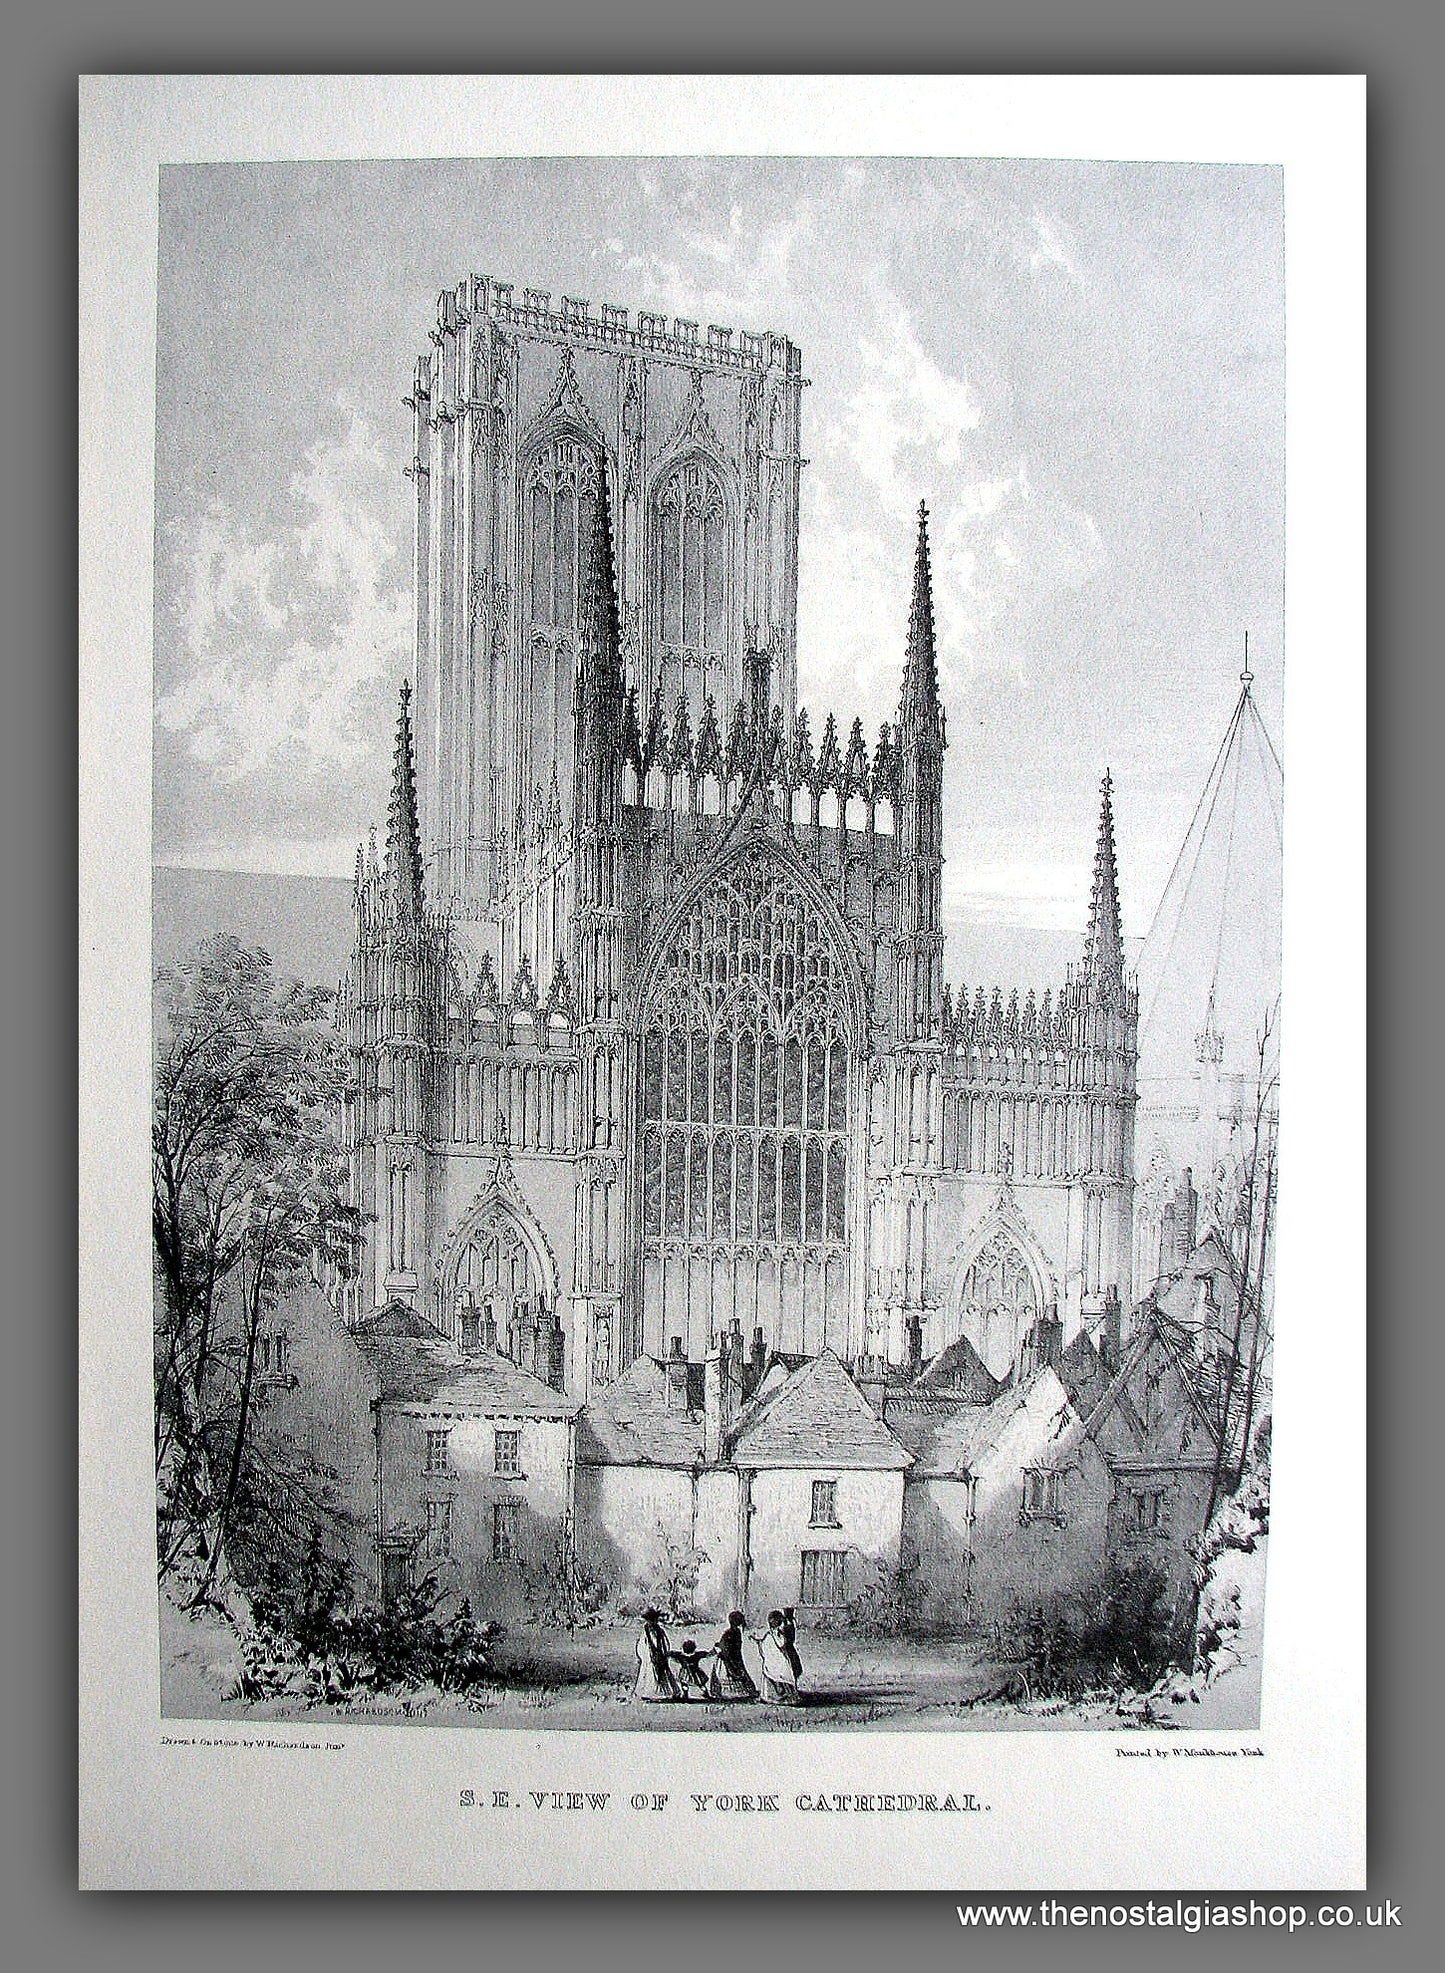 York Cathedral S.E. View, vintage illustration